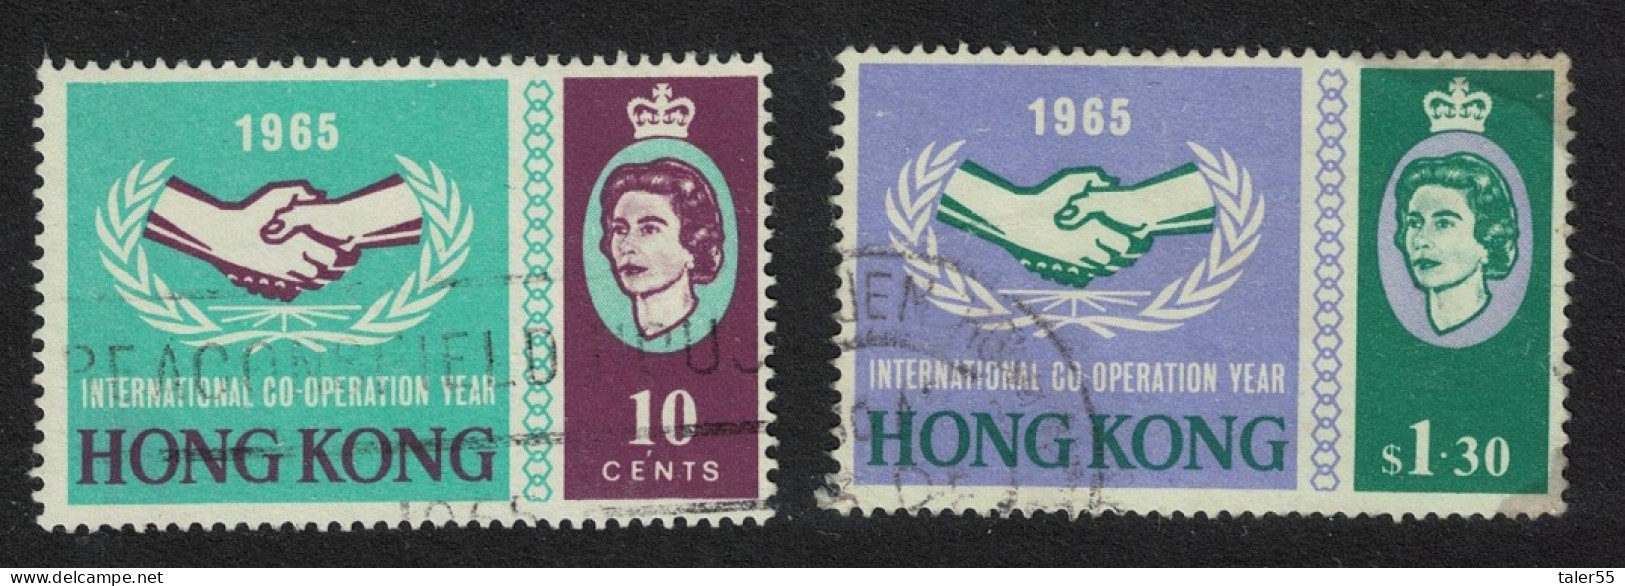 Hong Kong International Co-operation Year 2v 1965 Canc SG#216-217 - Used Stamps